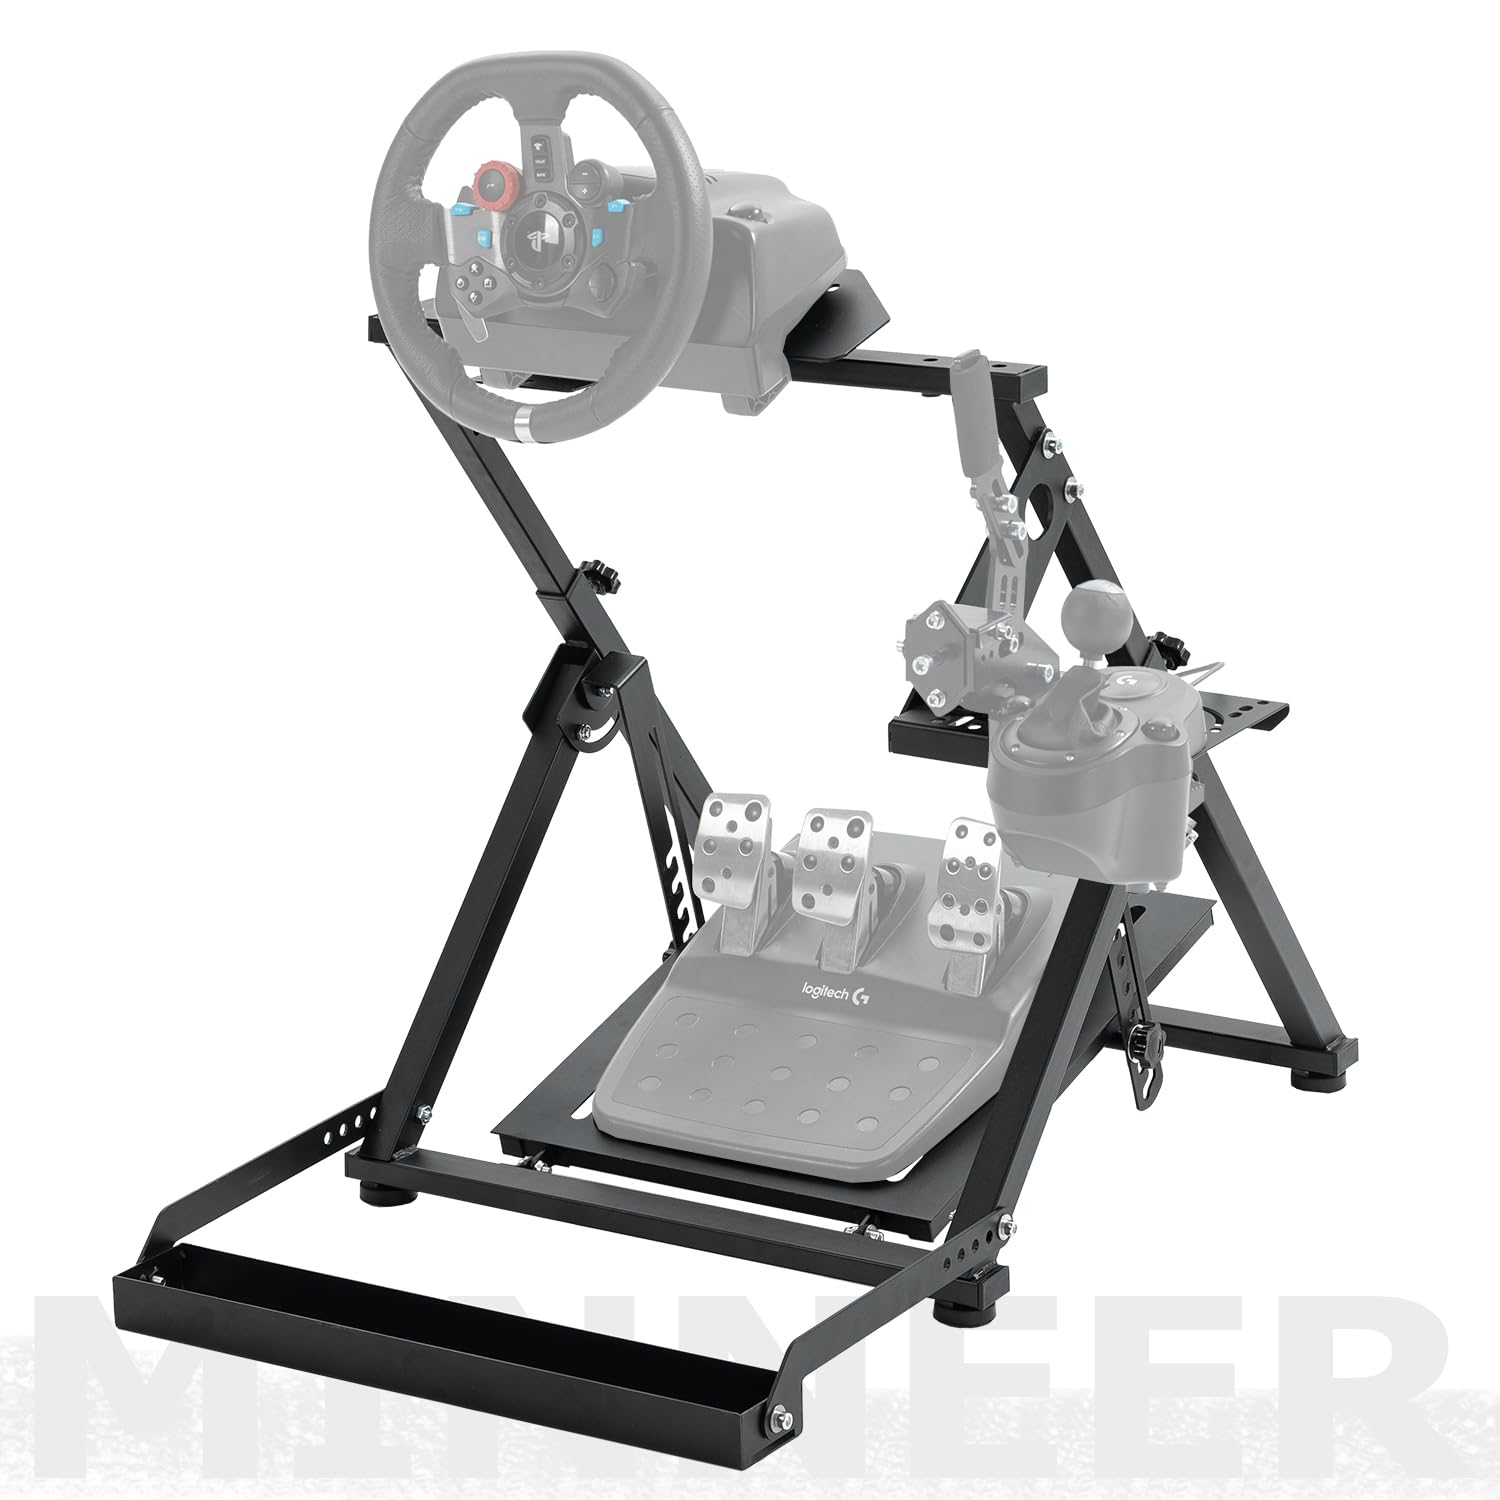 Minneer G29 Racing Wheel Stand Foldable Fit Logitech Thrustmaster T248 T300RS